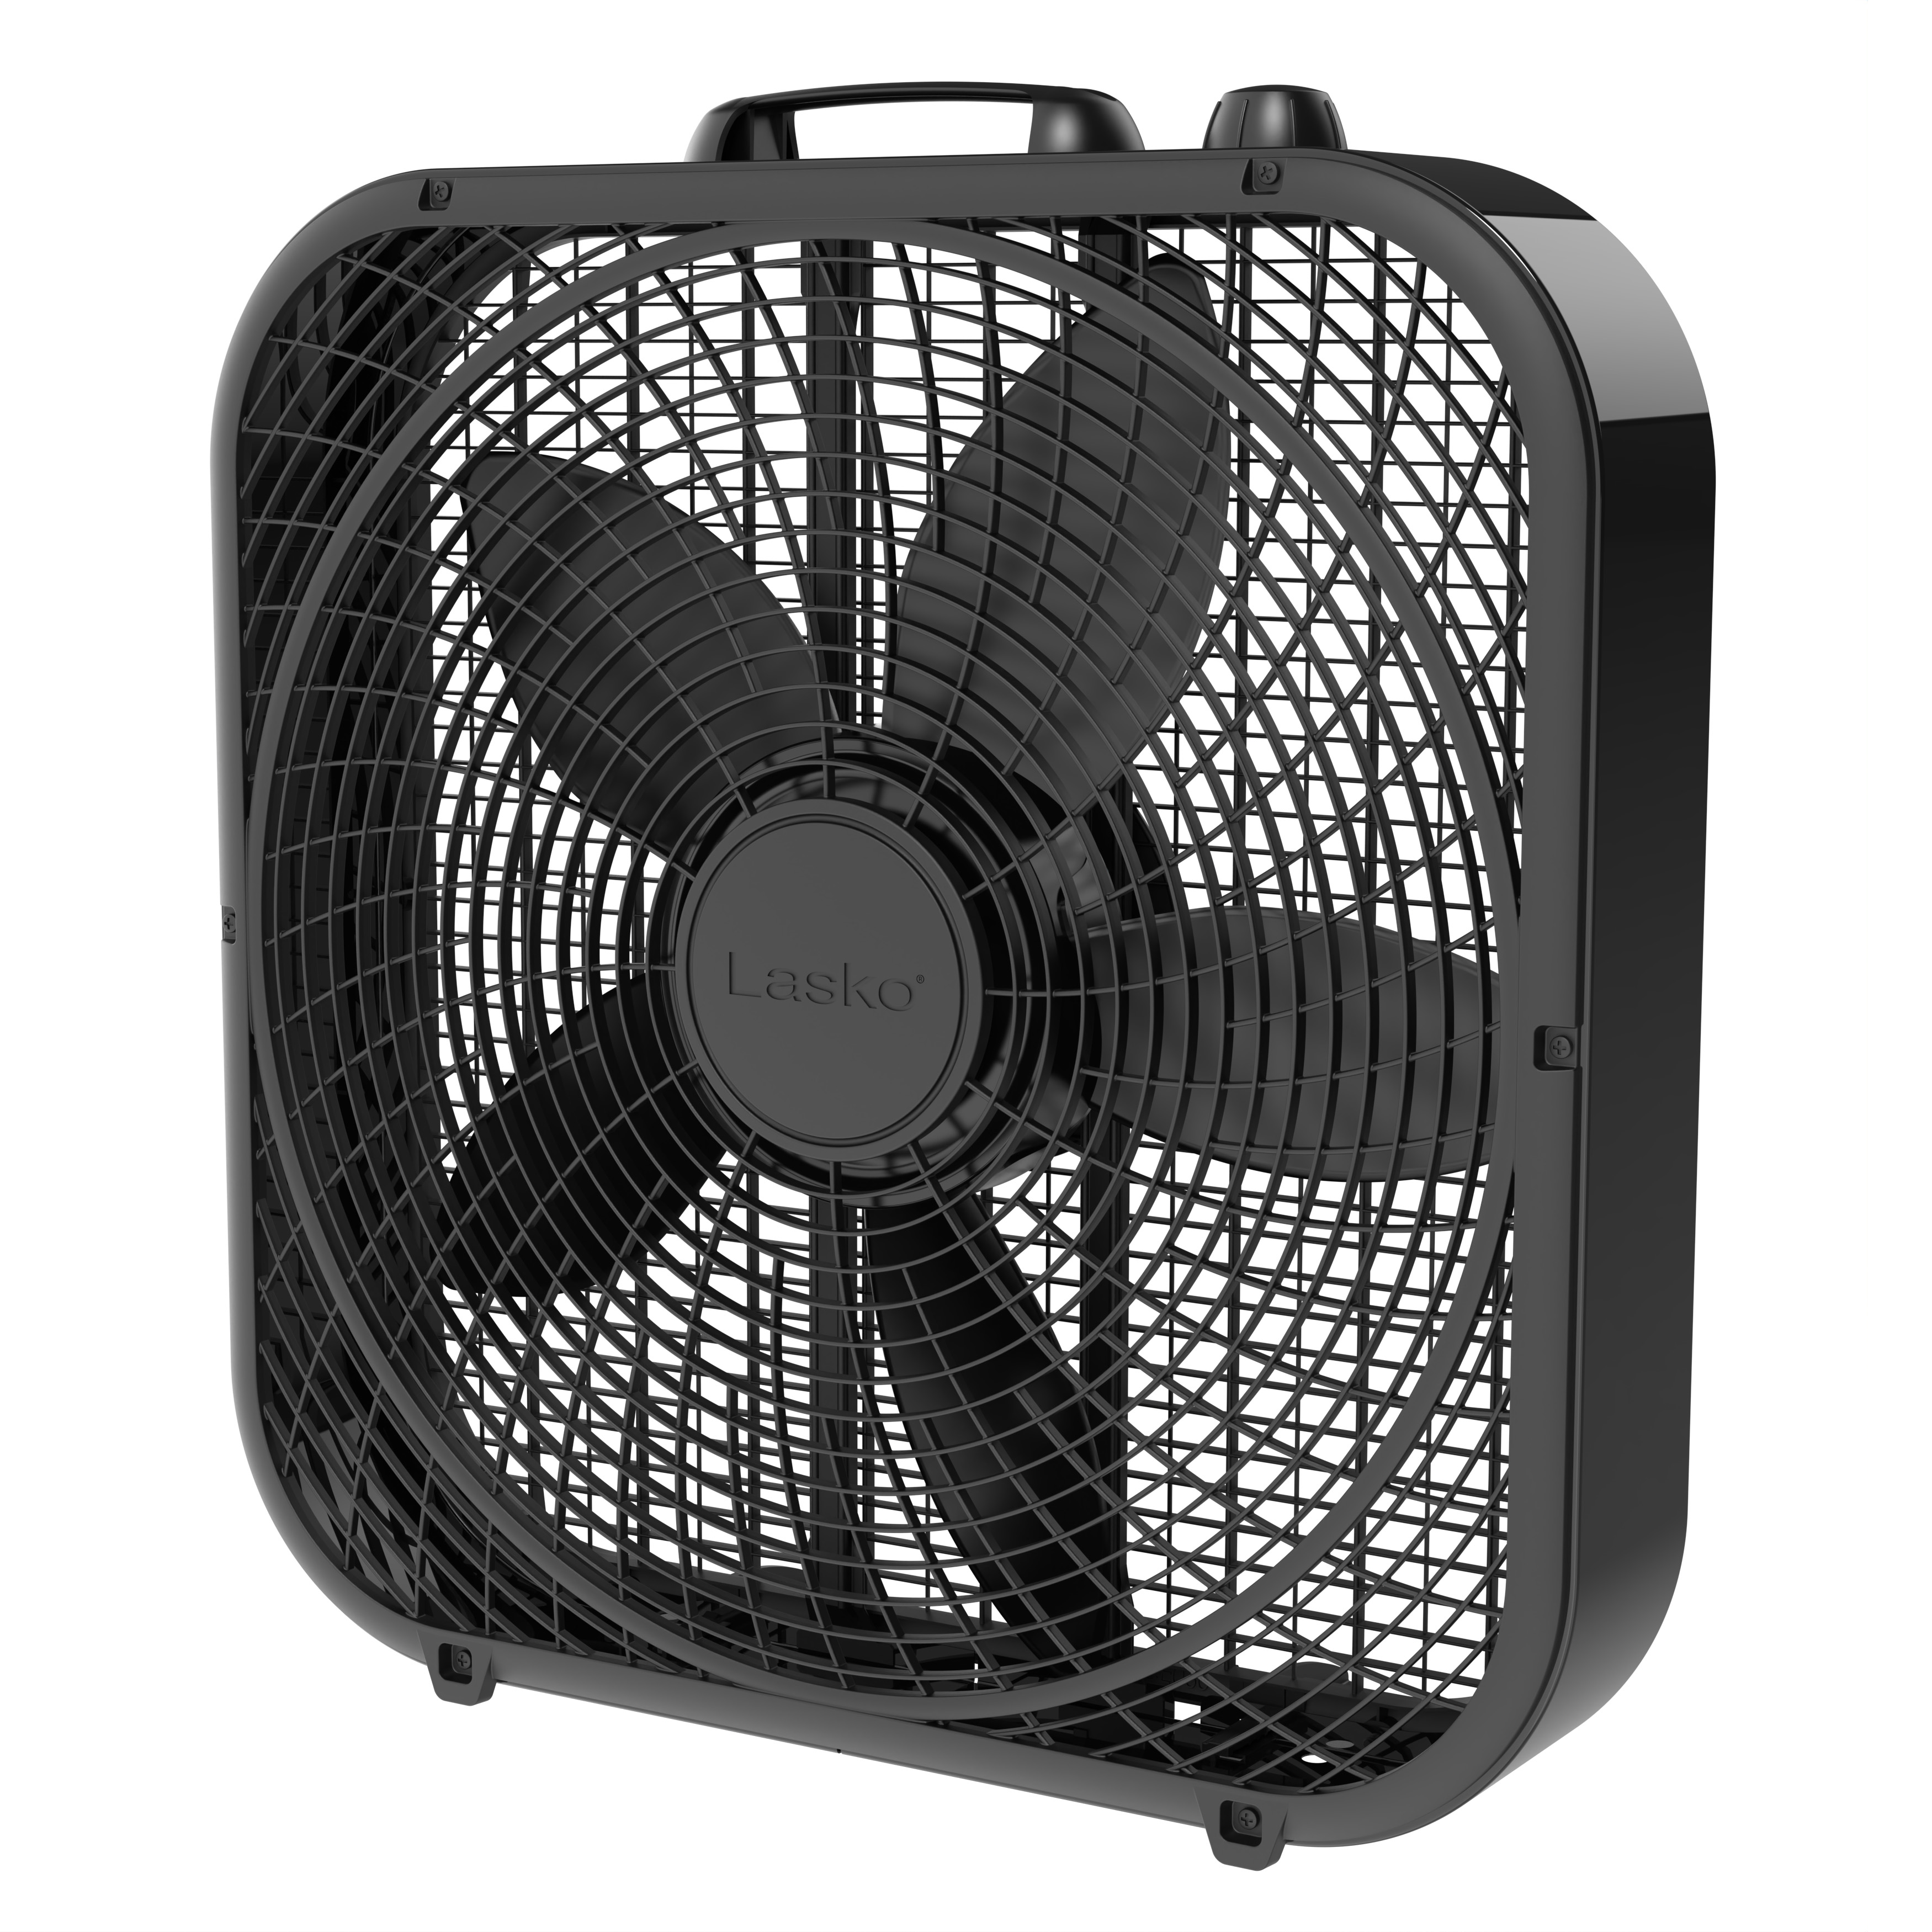 Lasko Cool Colors 20" Weather Resistant Box Fan, with 3-Speeds, 22" Height,  Black, B20301, New - image 1 of 9